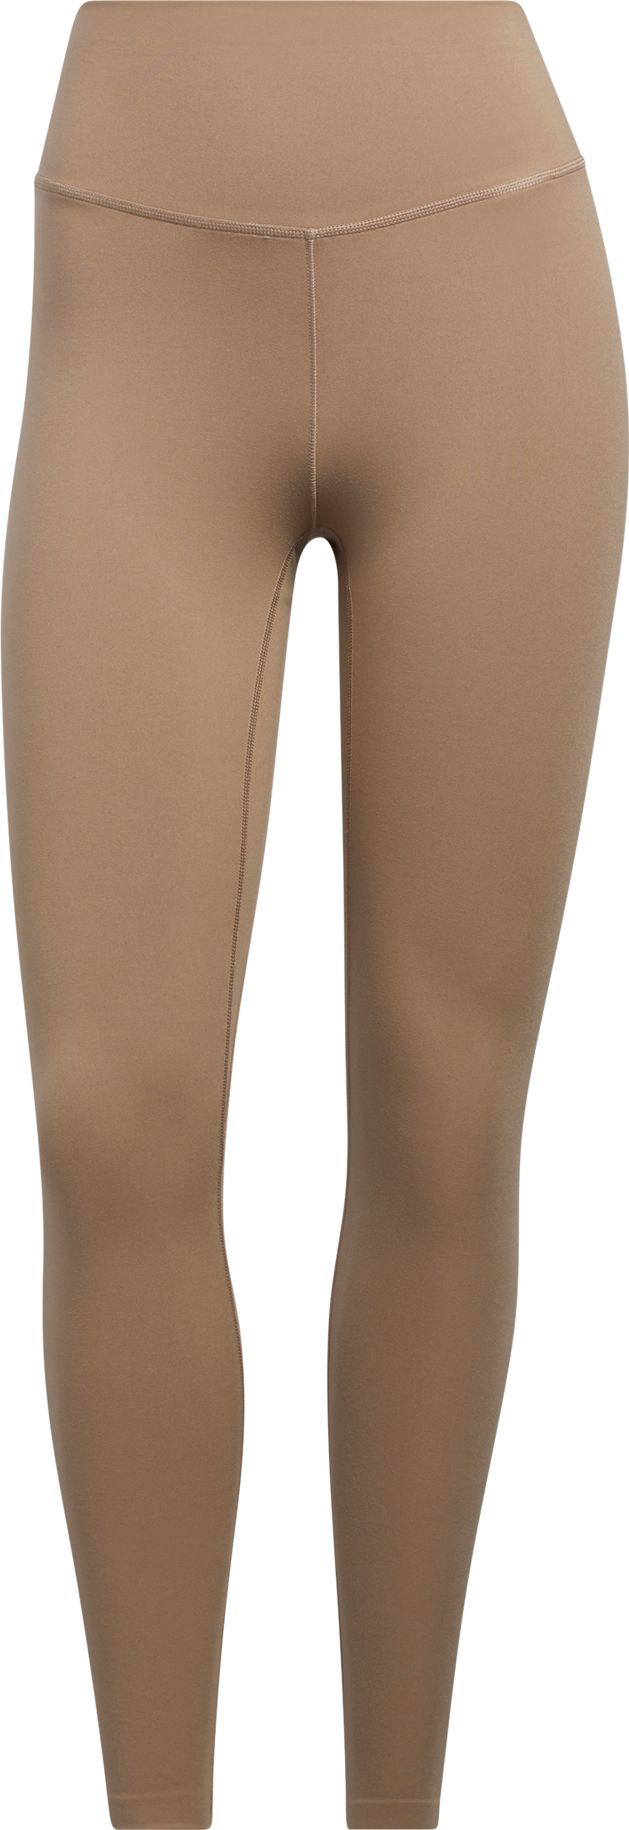 Women's Yoga Luxe Studio 7/8 Tight Chalky Brown